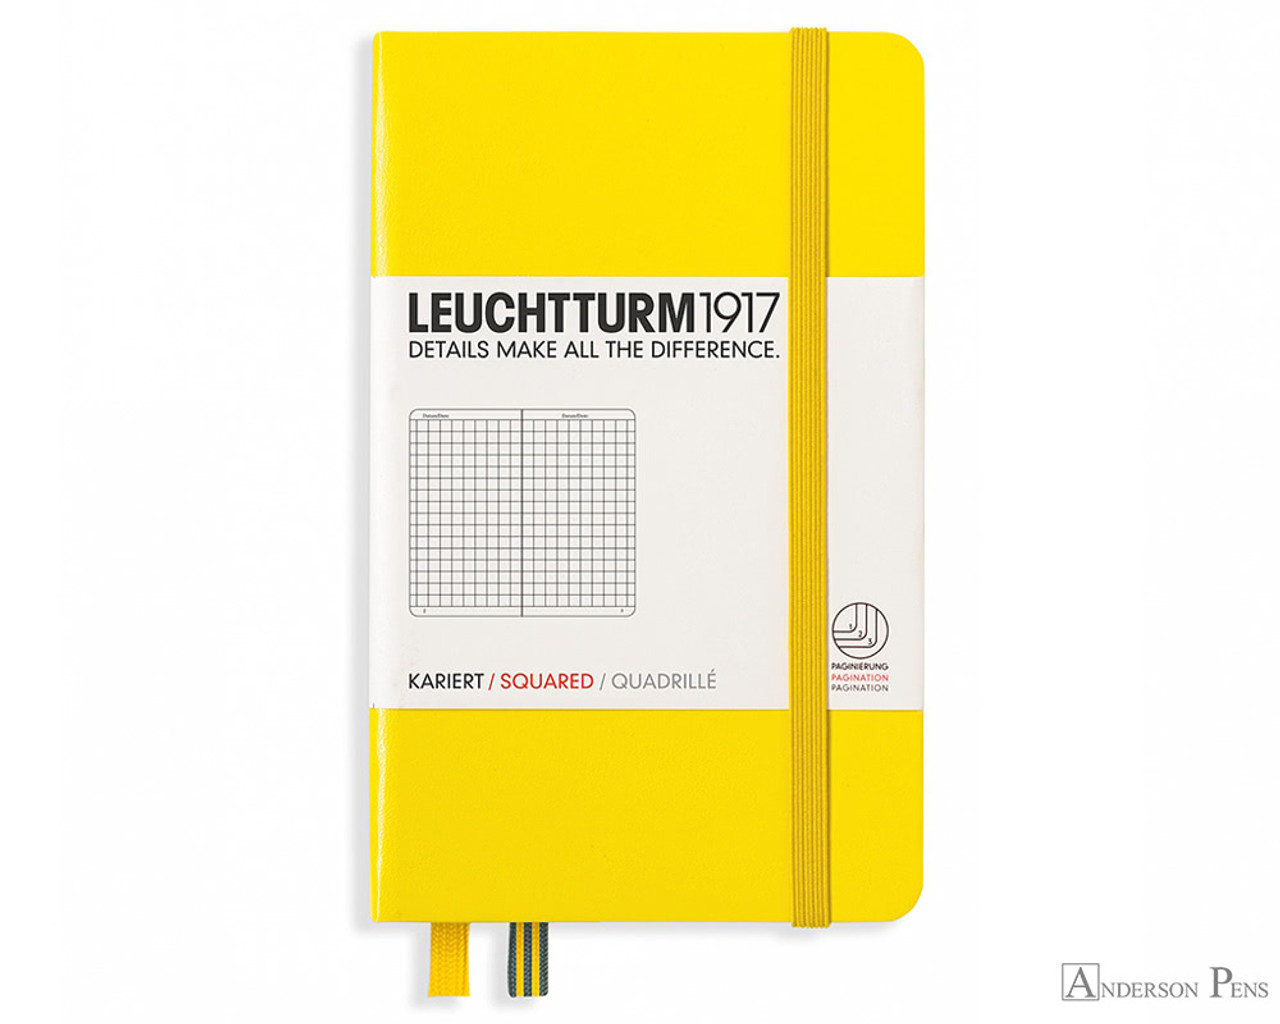 Paper Review: Other Leuchtturm 1917 Notebook Options (Part 1 of 3